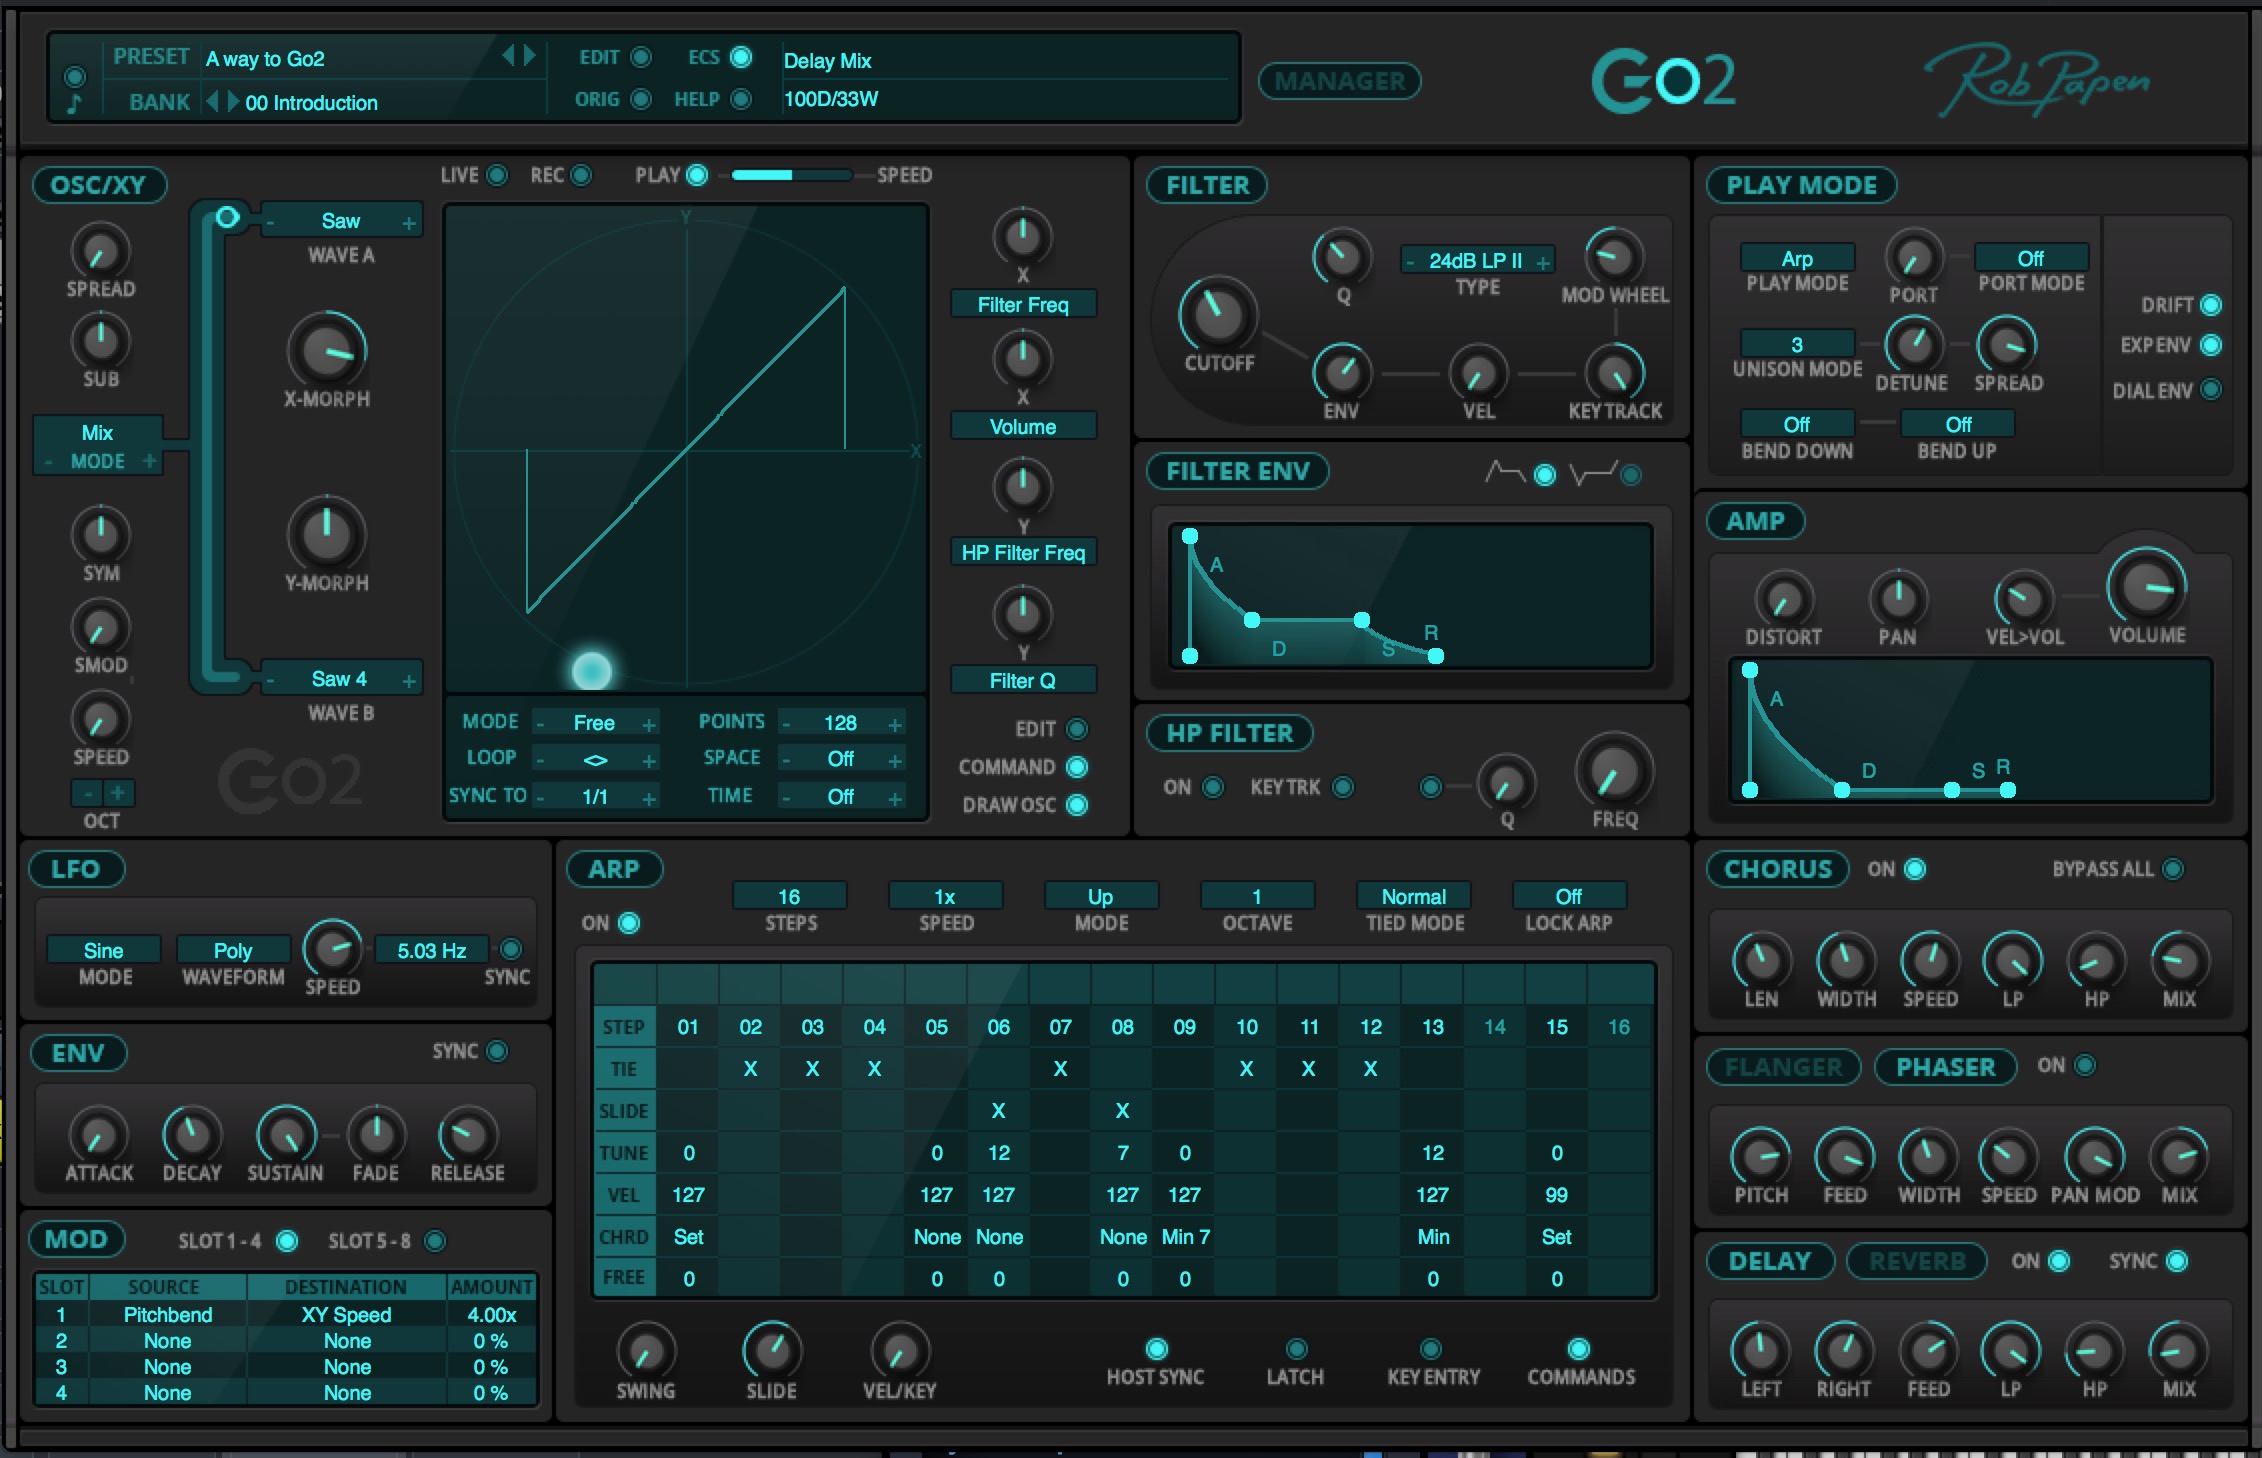 Go2 by Rob Papen Review